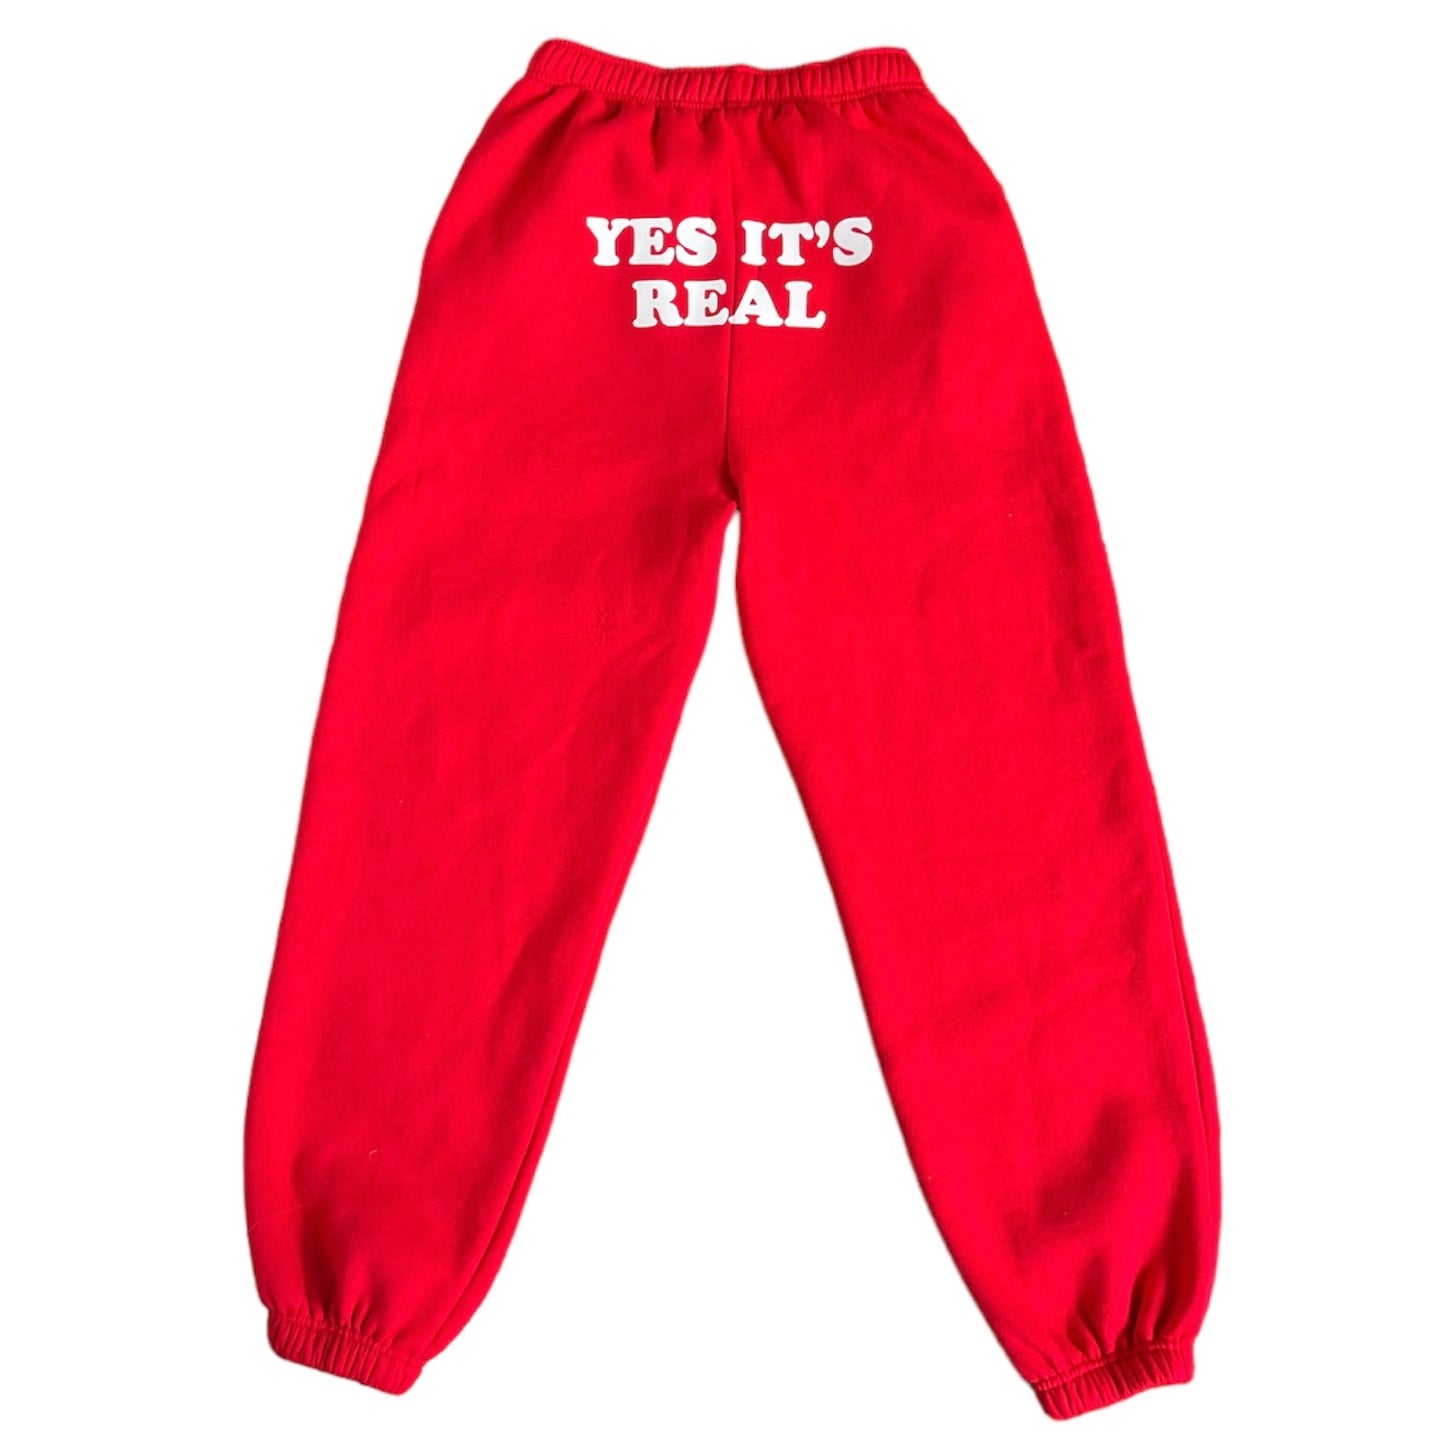 Yes It’s Real Sweatpants